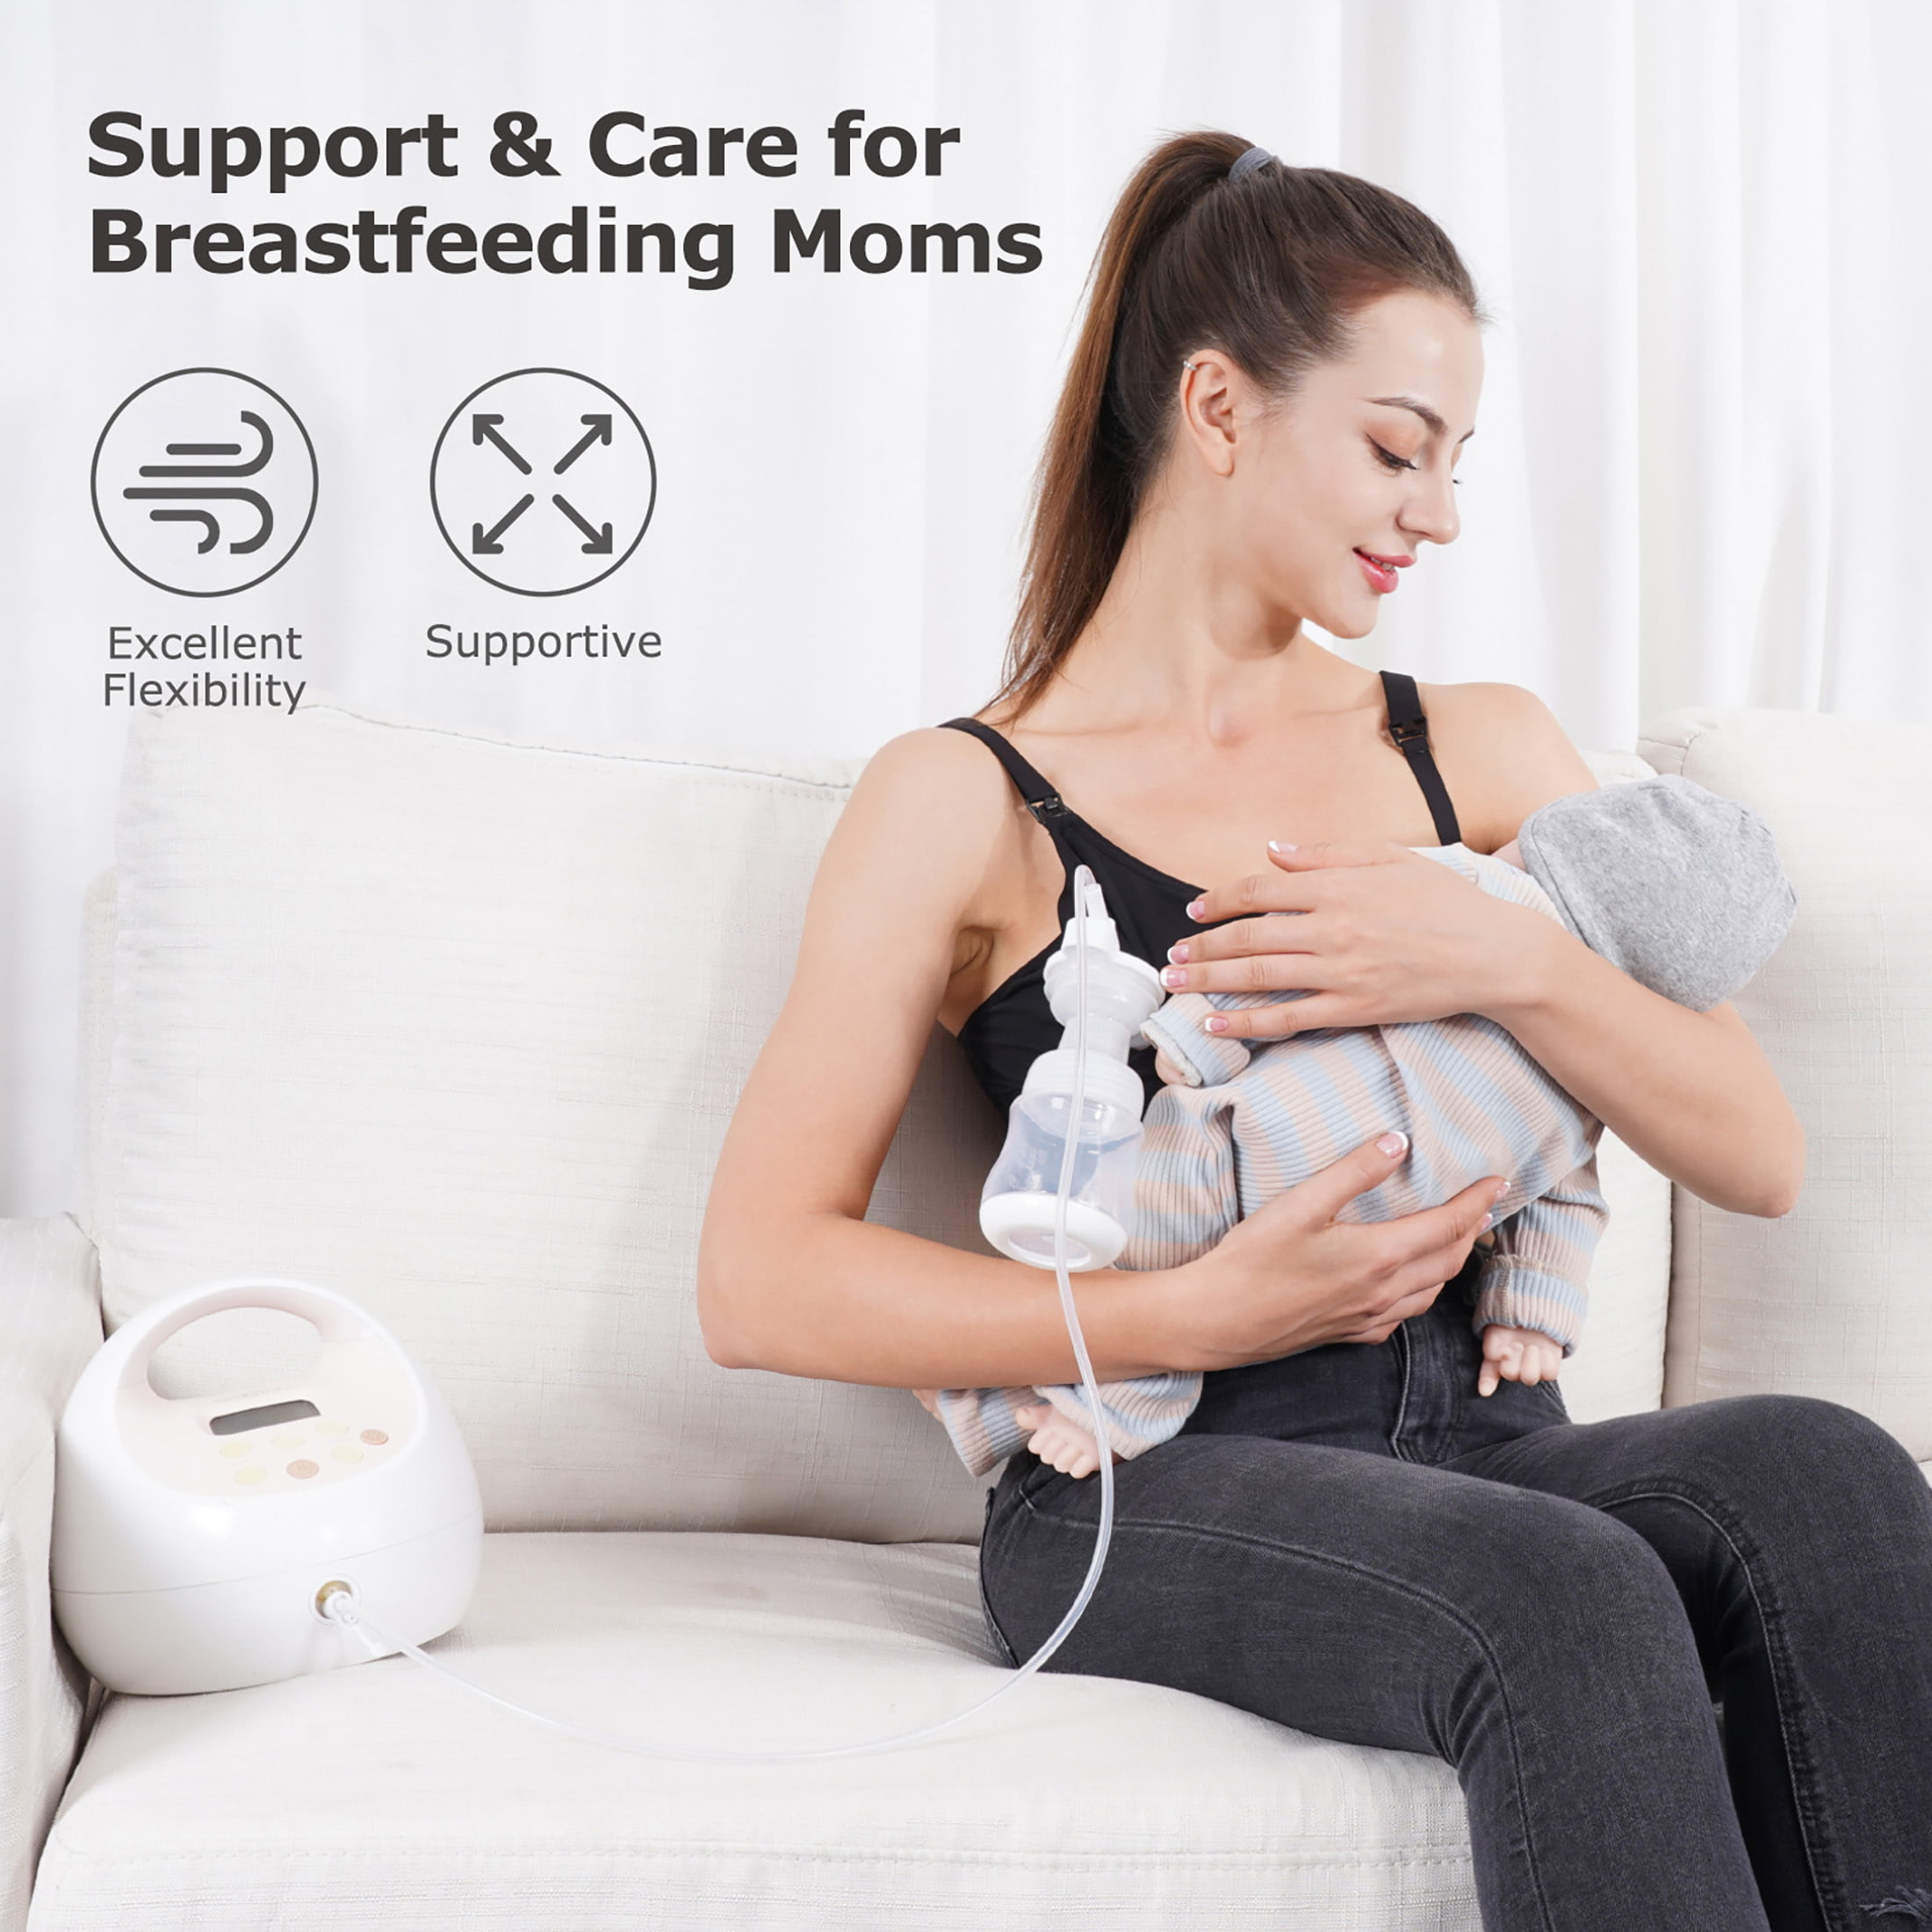 Breastmates Hands-Free Pumping Bra - the game changer for mums